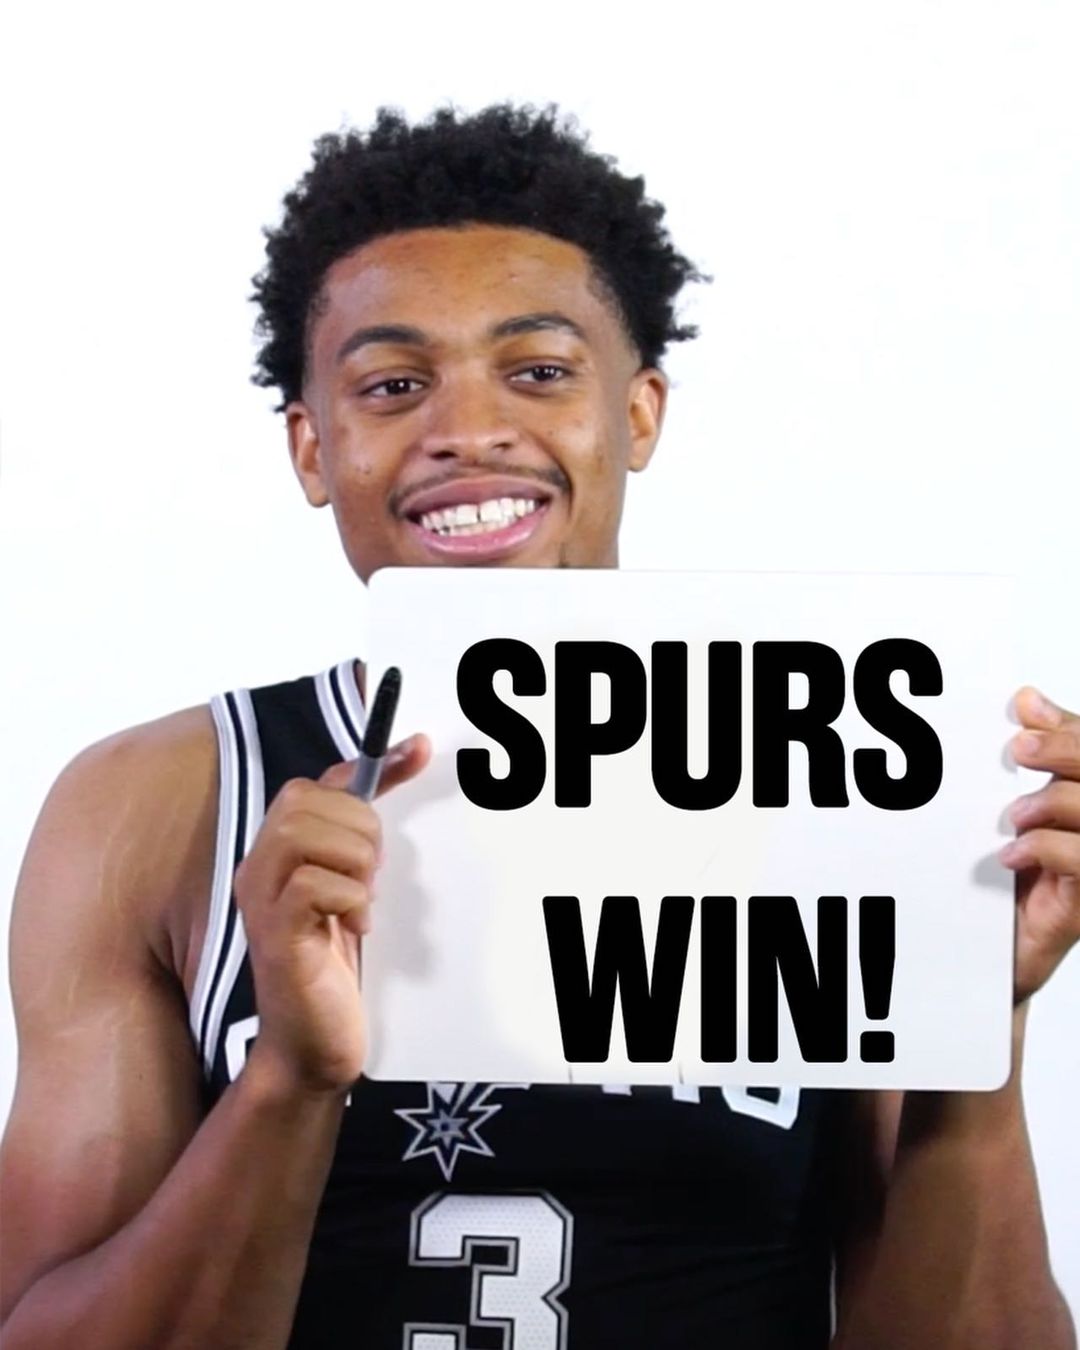 SPURS WIN!!! SPURS WIN!!! SPURS WIN!!!  Hard fought battle for the guys ...